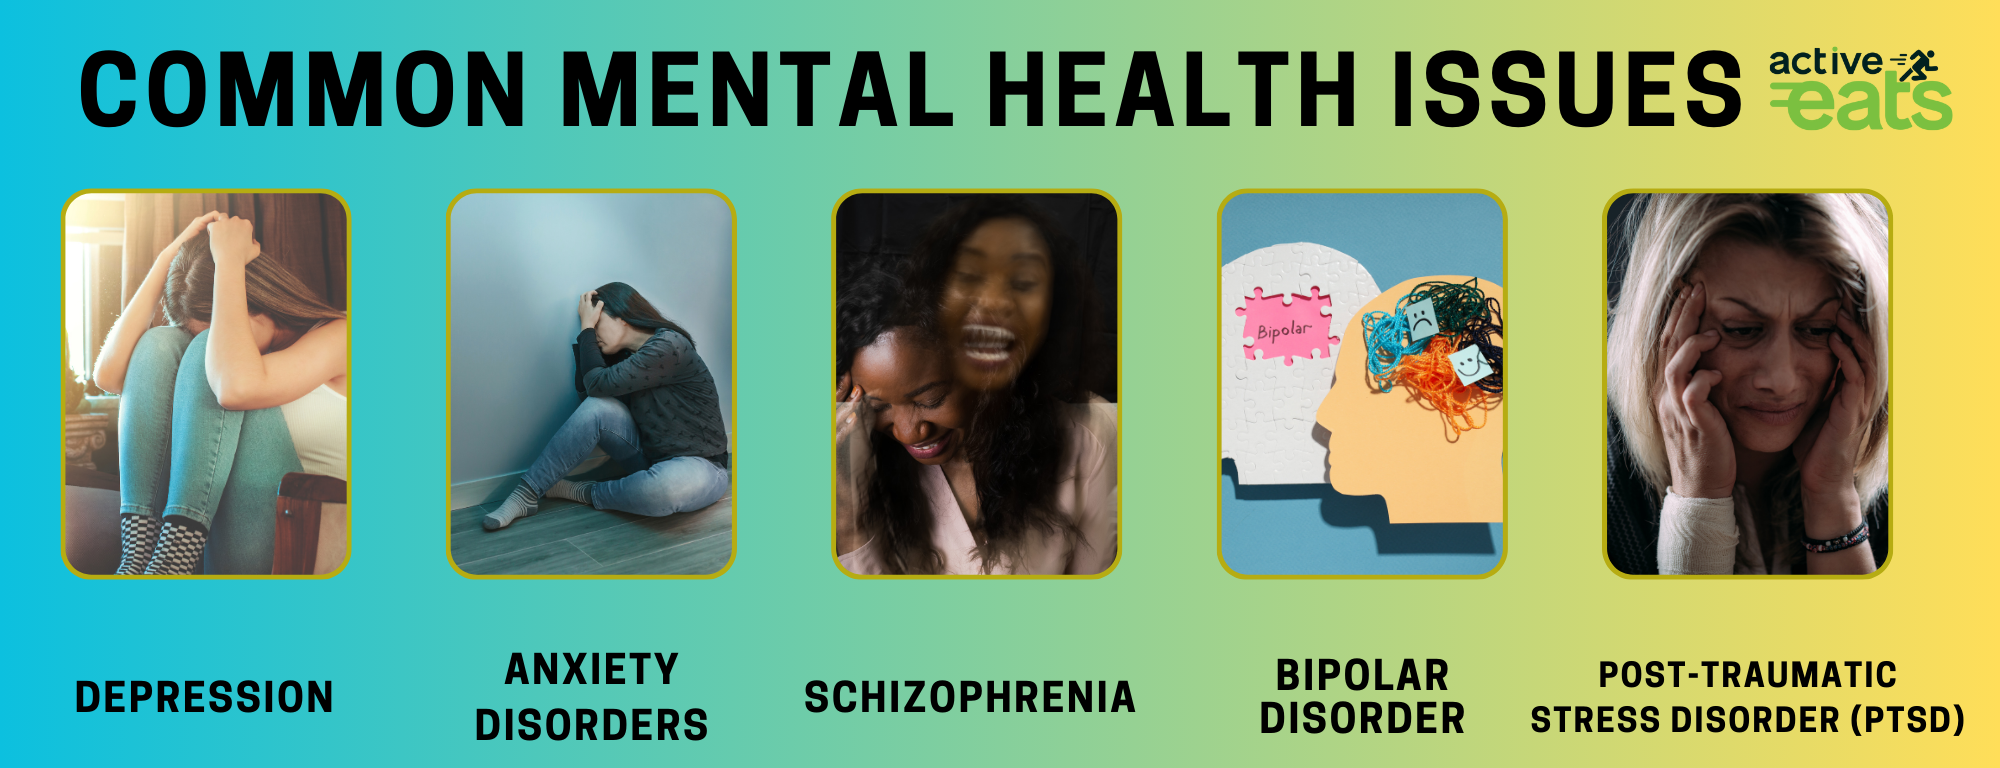 Image showing common mental health issues like girl in depression, girl experiences anxiety, schizophrenic experiences of a girl, bipolar disorder graphic image of human head and post traumatic stress disorder of a woman holding her head 